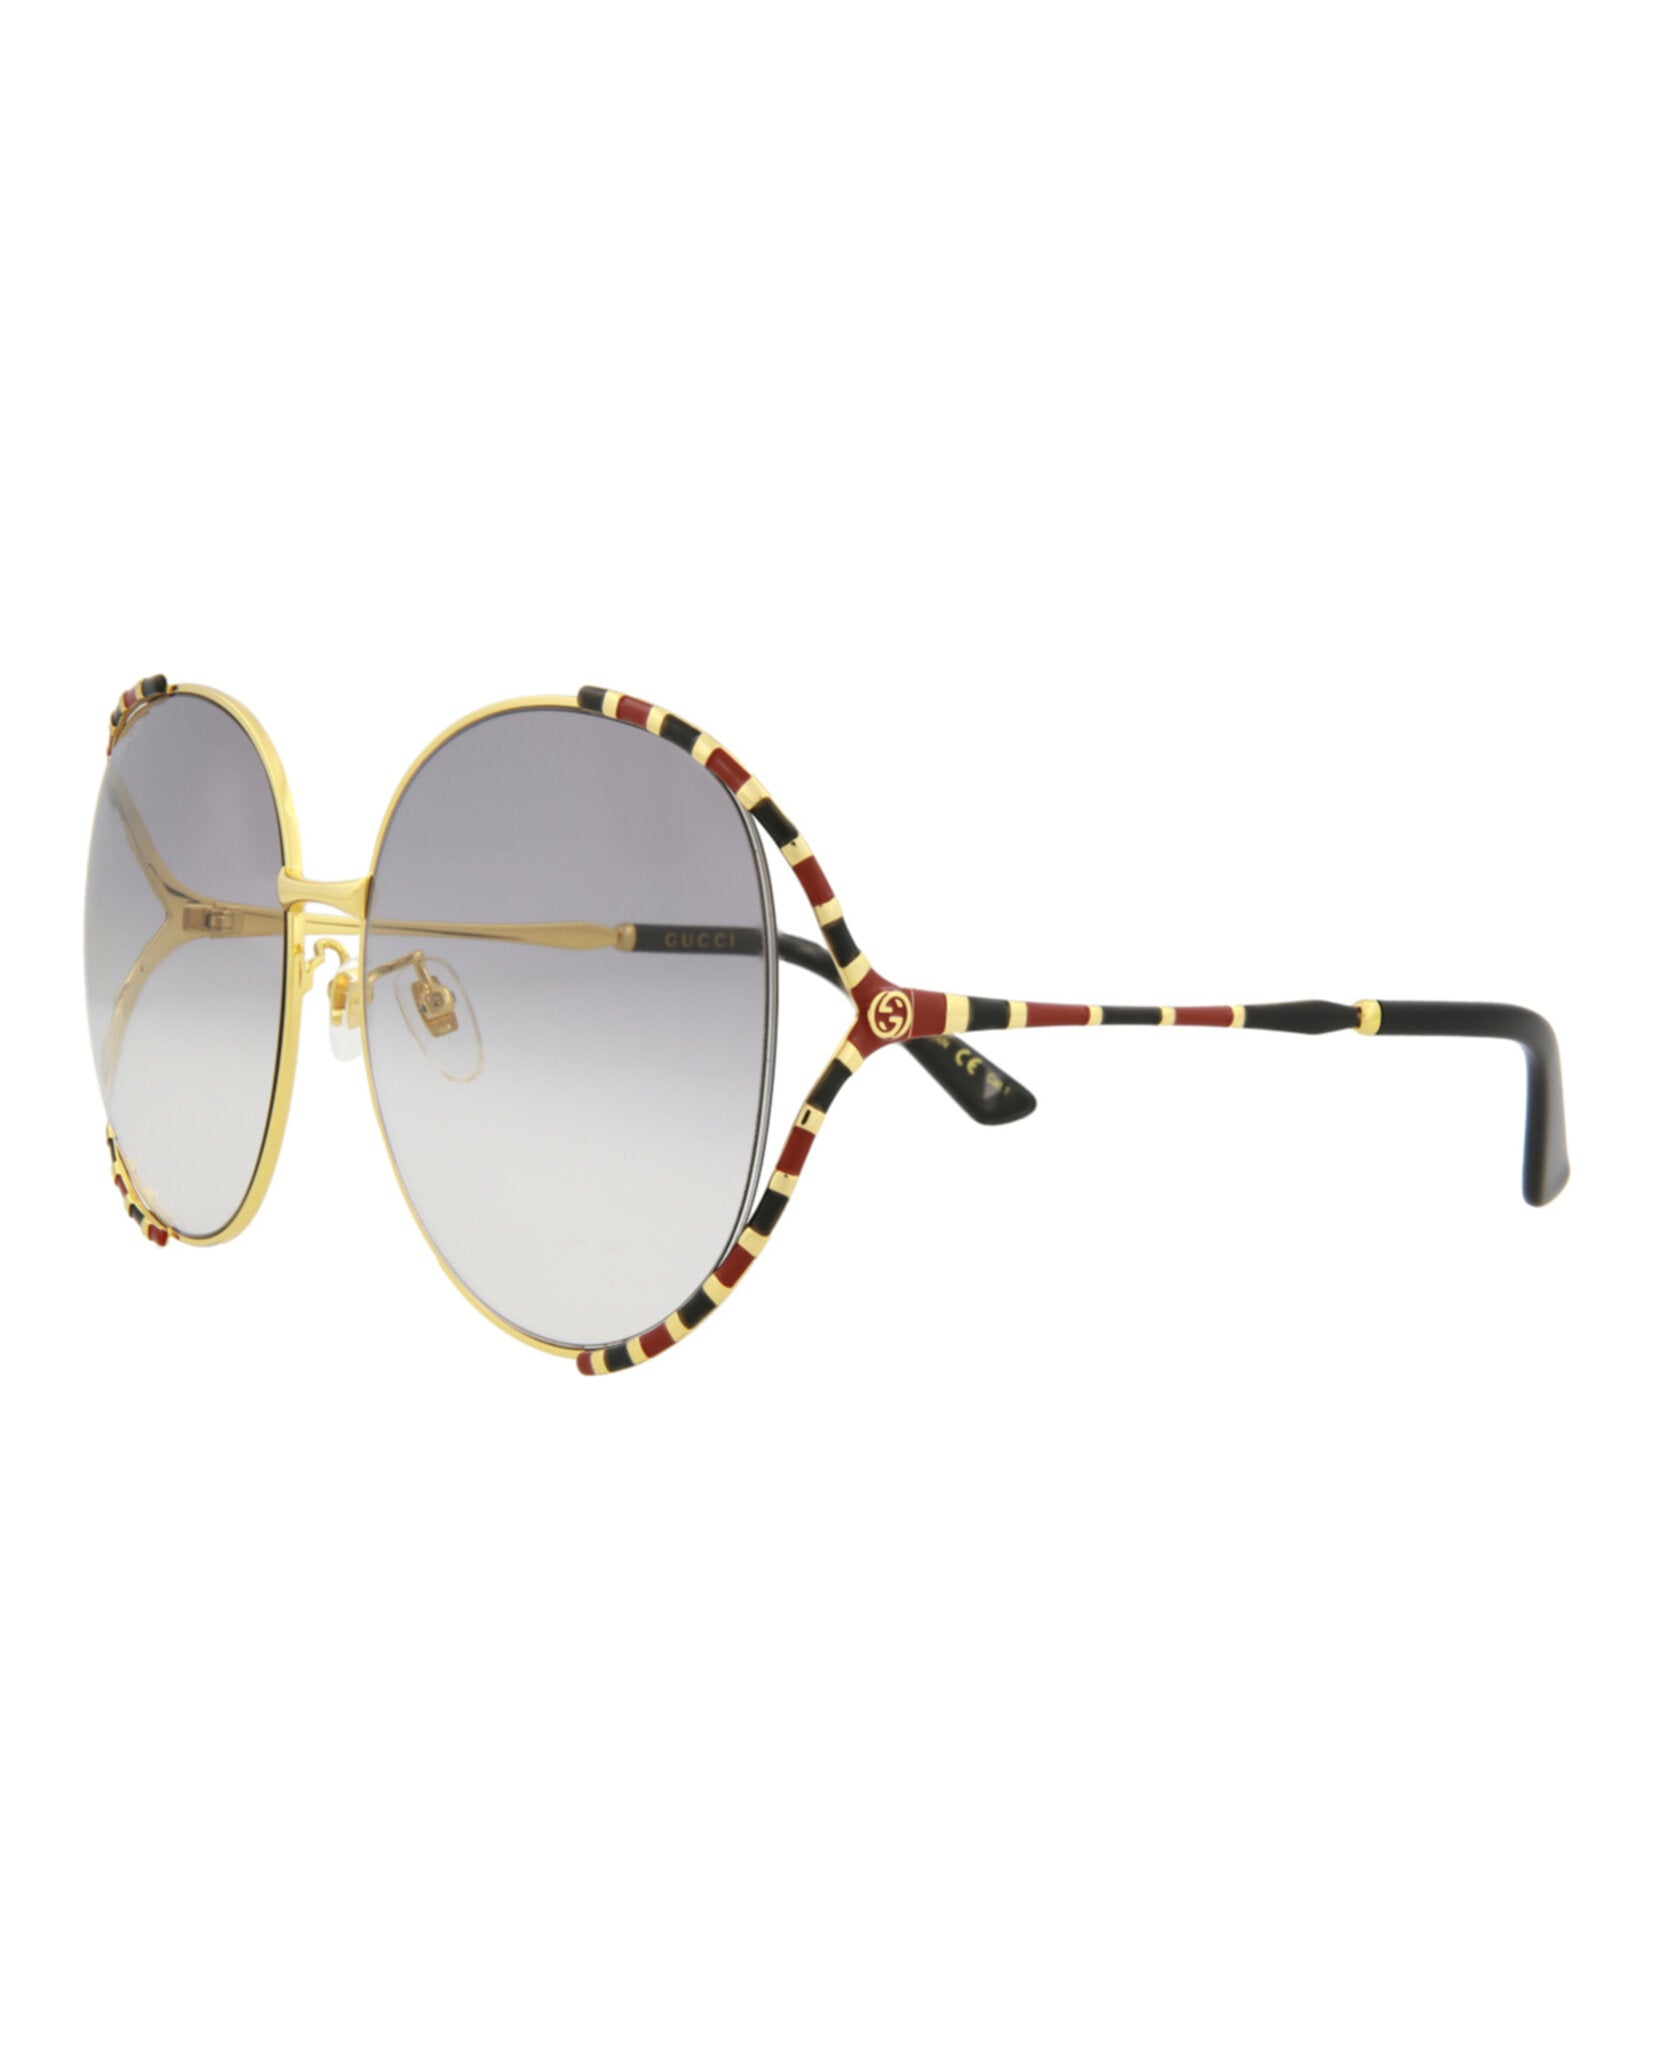 title:Gucci Women's GG0595S-30008116006 Novelty Sunglasses;color:Gold Gold Grey